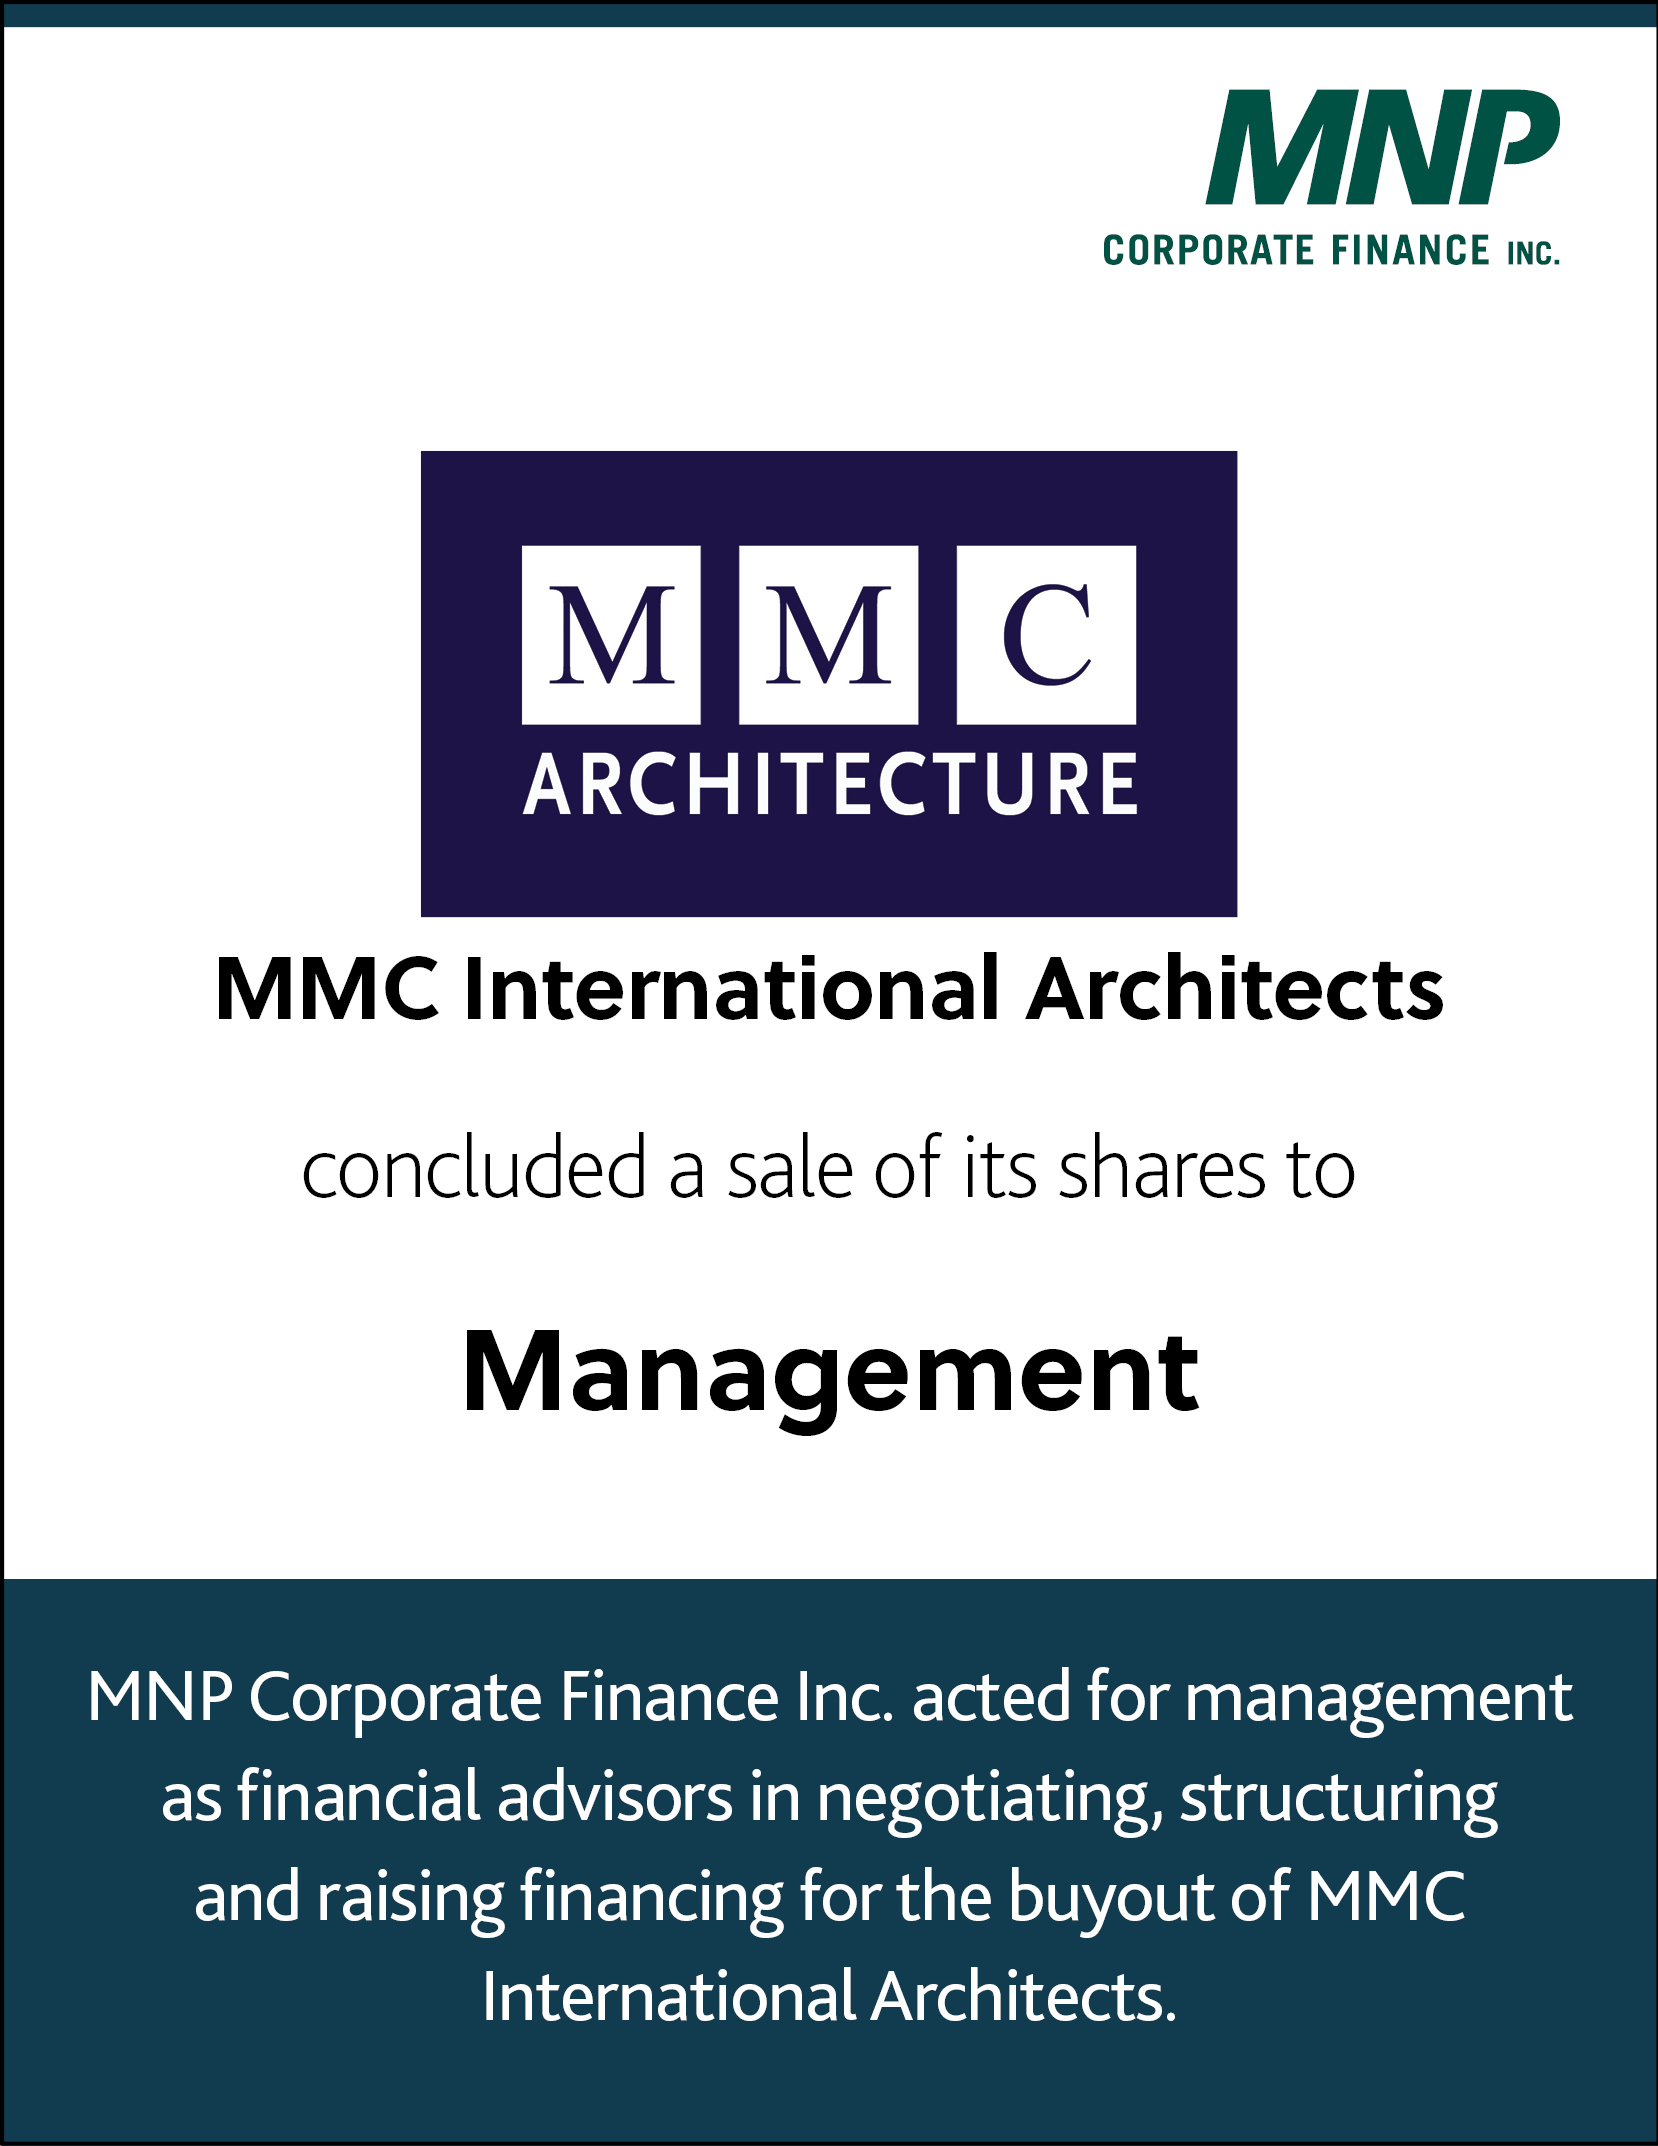 MMC International Architects concluded a sale of its shares to Management